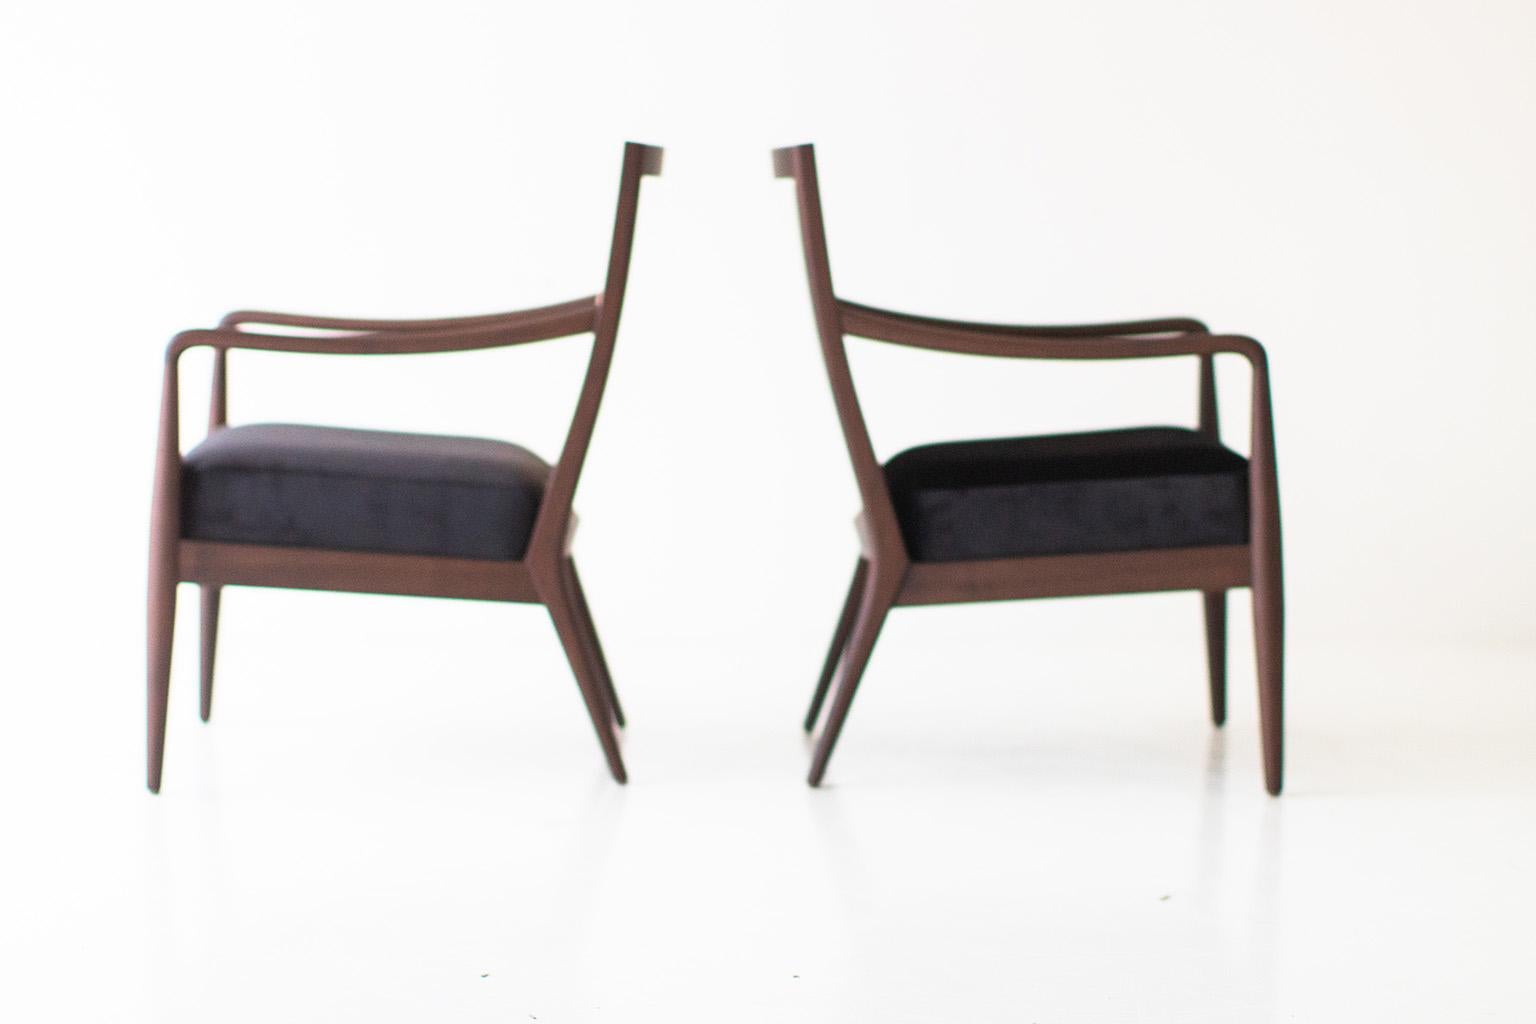 CraftAssociates Chairs, Peabody Modern Cane Back Chairs, Black, Walnut

These Peabody Cane Back Chairs in black are handcrafted in solid walnut and fur. However, each is made to order. Wood species and fabric can be customized. Craft Associates has